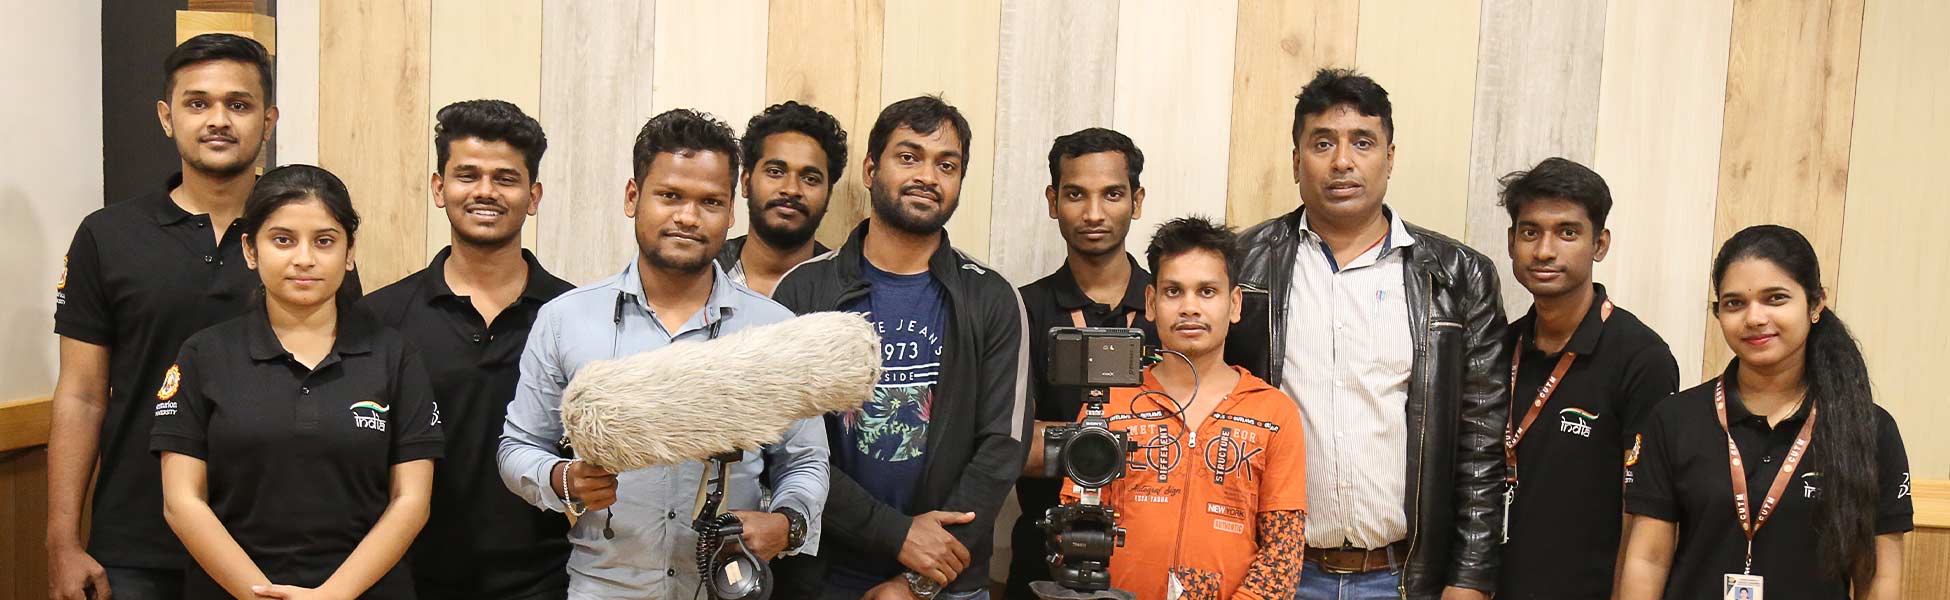 tvc production house in india, tv commercial production house in india, tvc production company in india, tv commercial production company in india